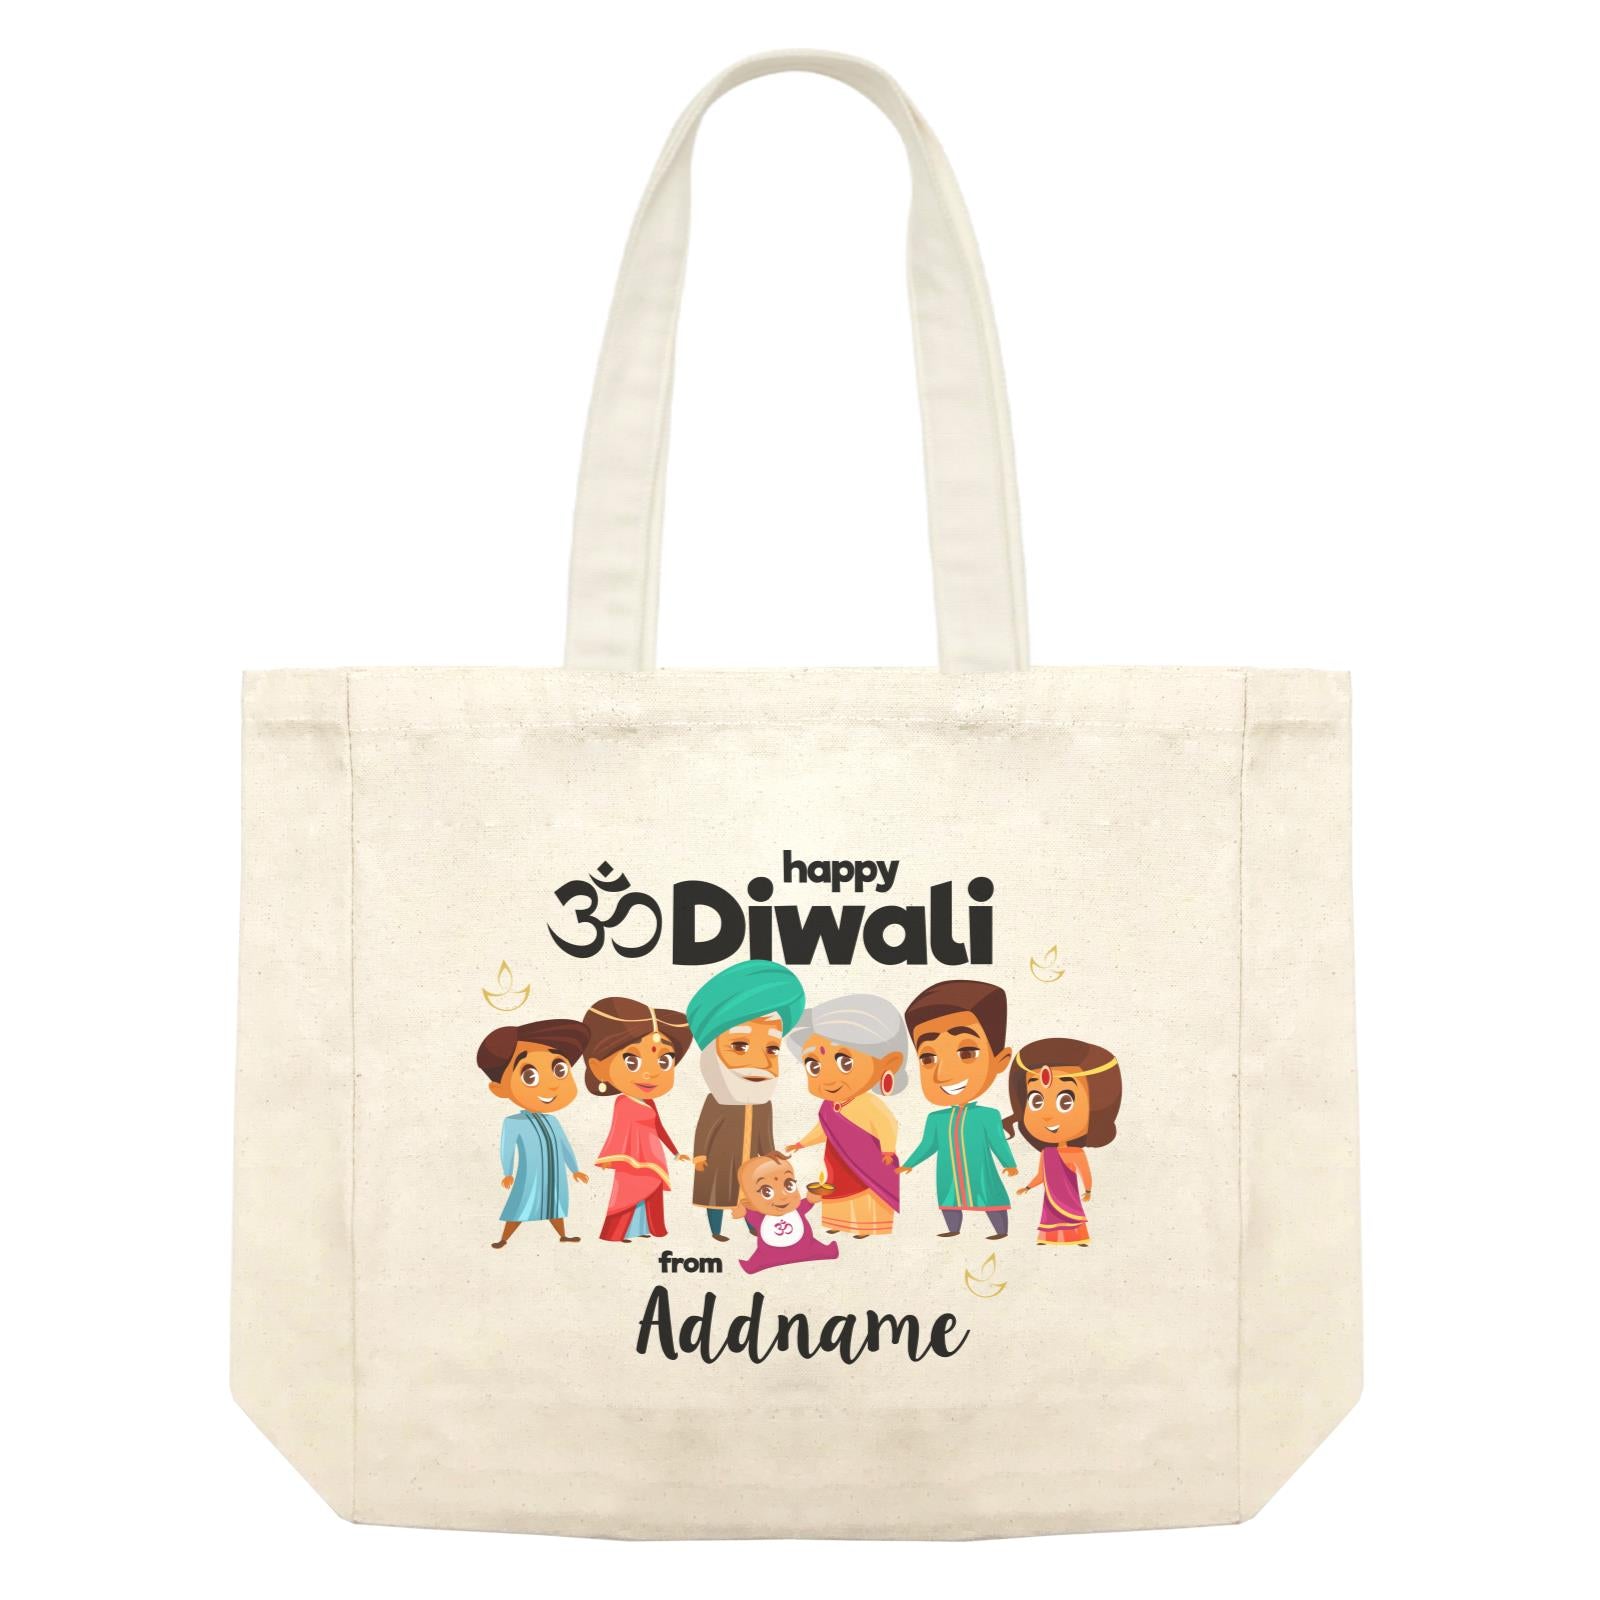 Cute Family Extended OM Happy Diwali From Addname Shopping Bag